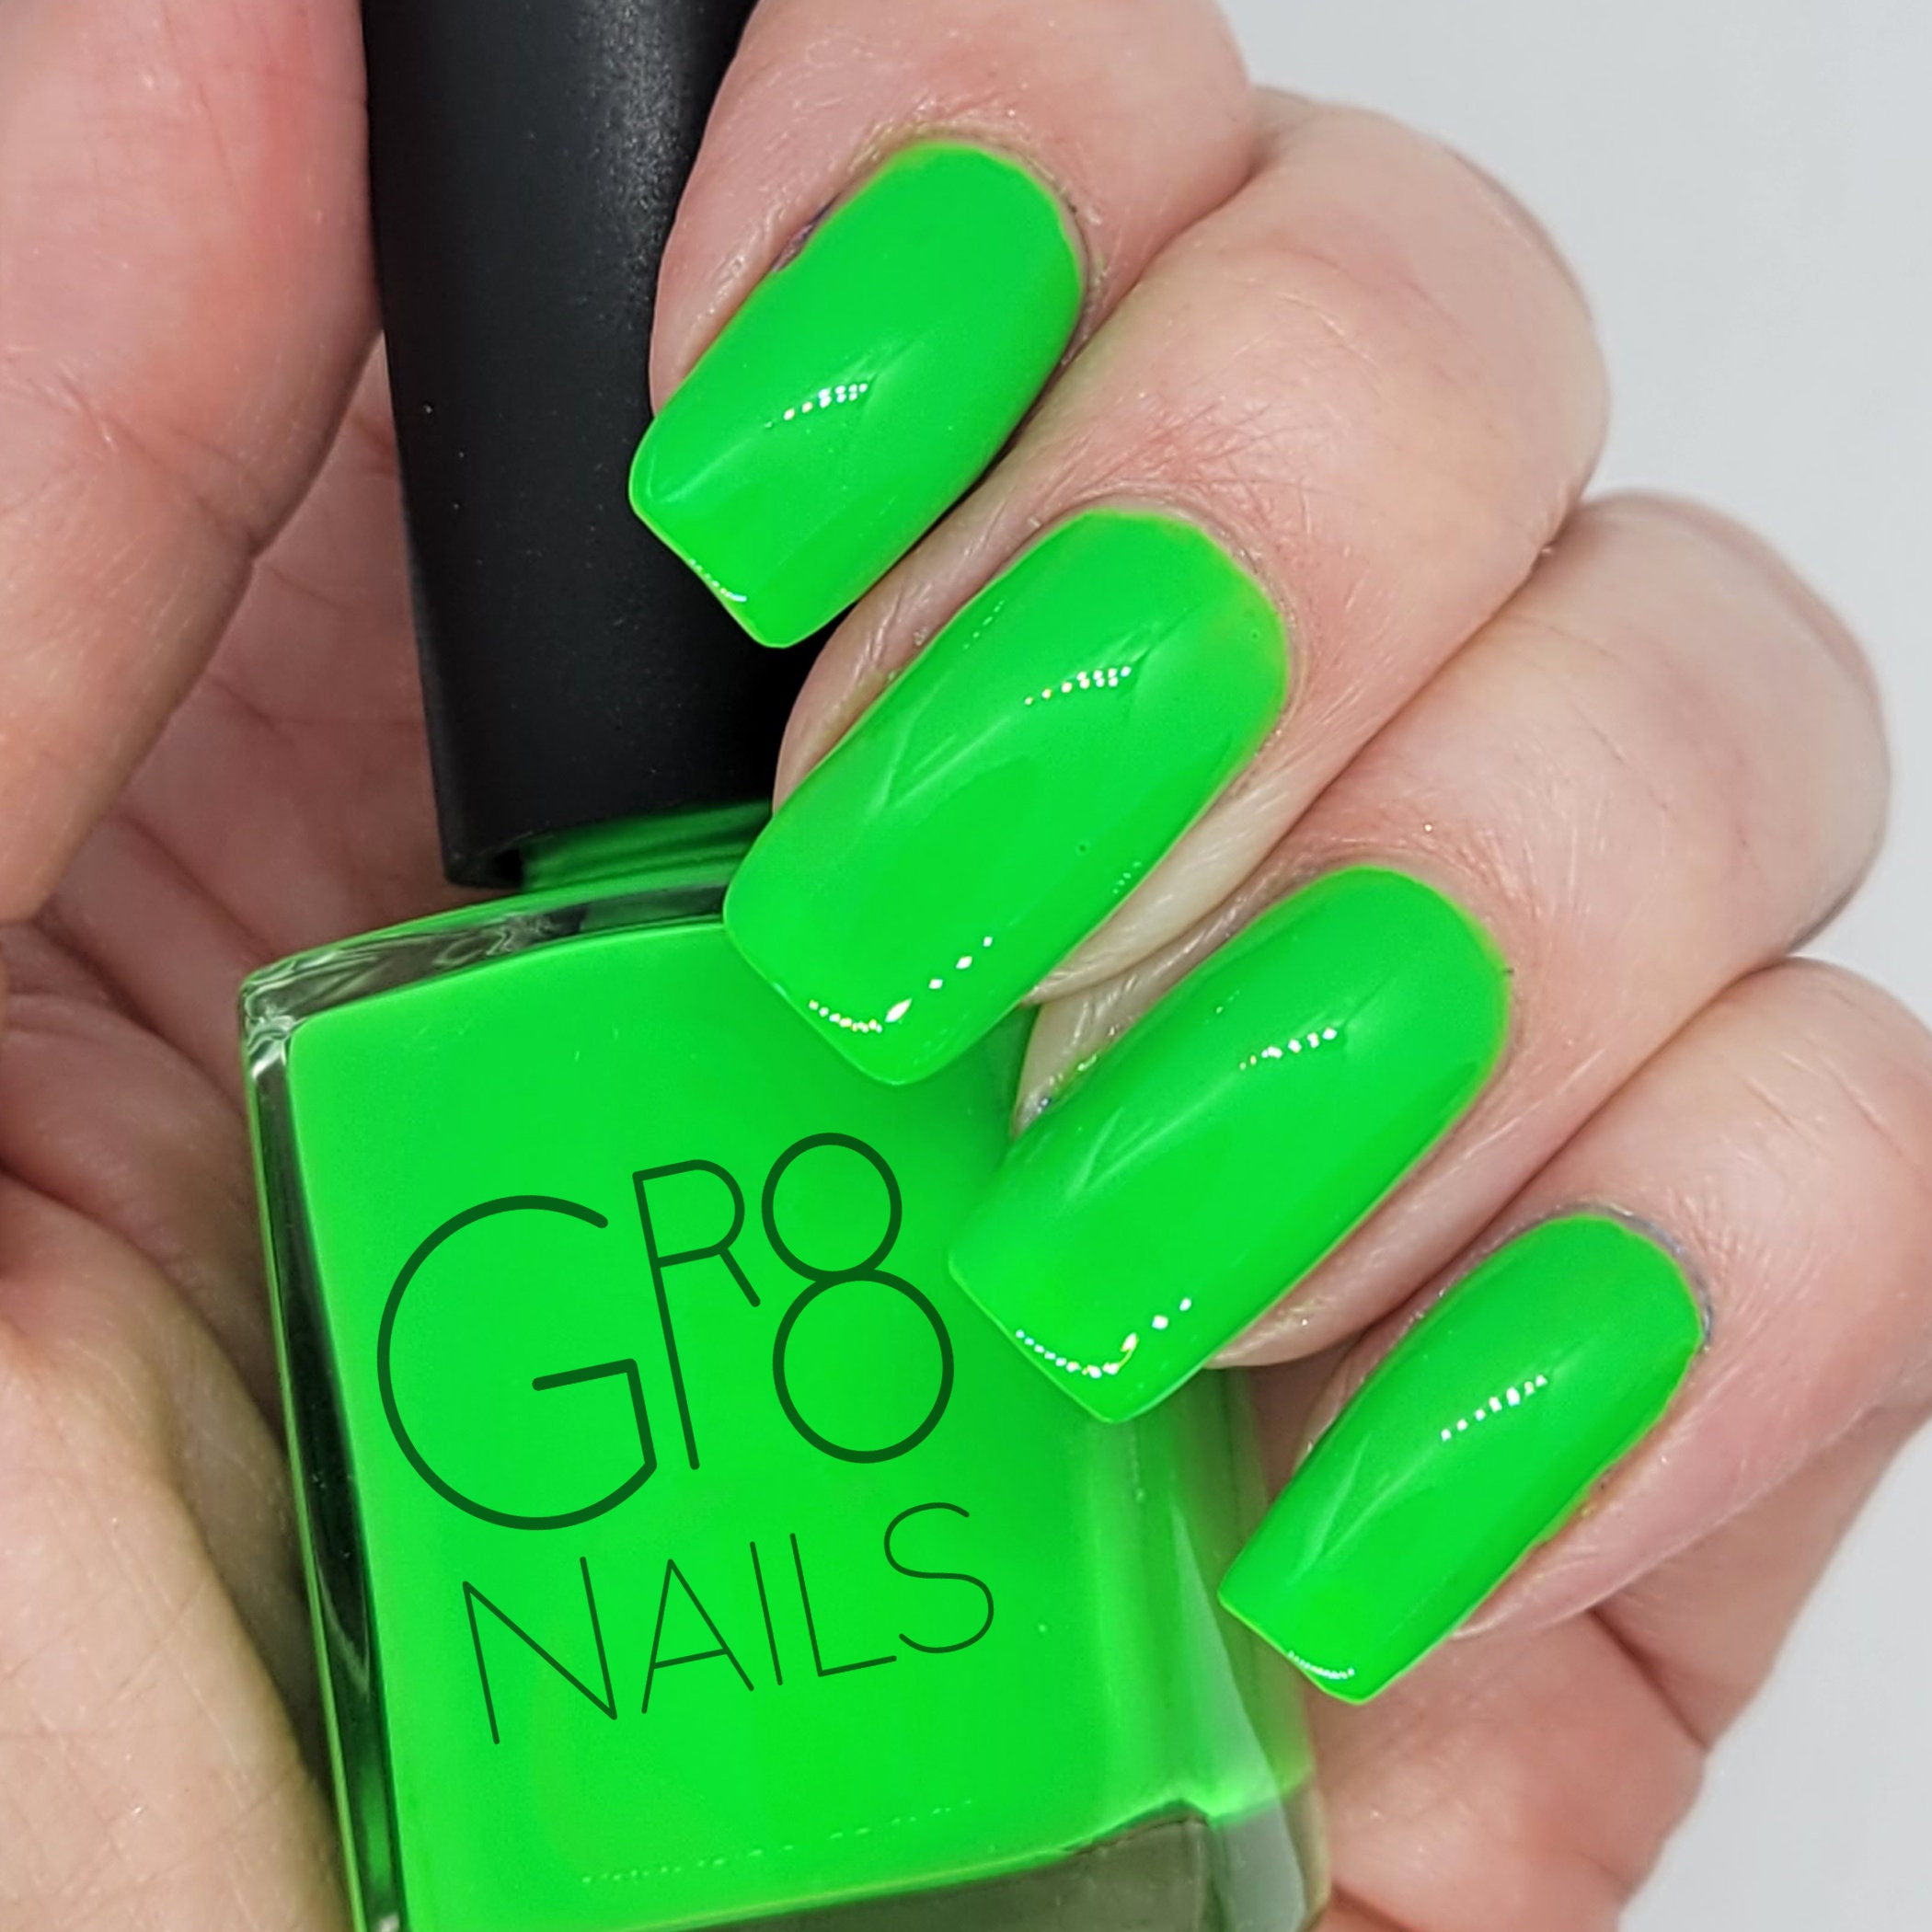 24 Neon Nail Ideas That Are Vibrant and Fun — See Photos | Allure